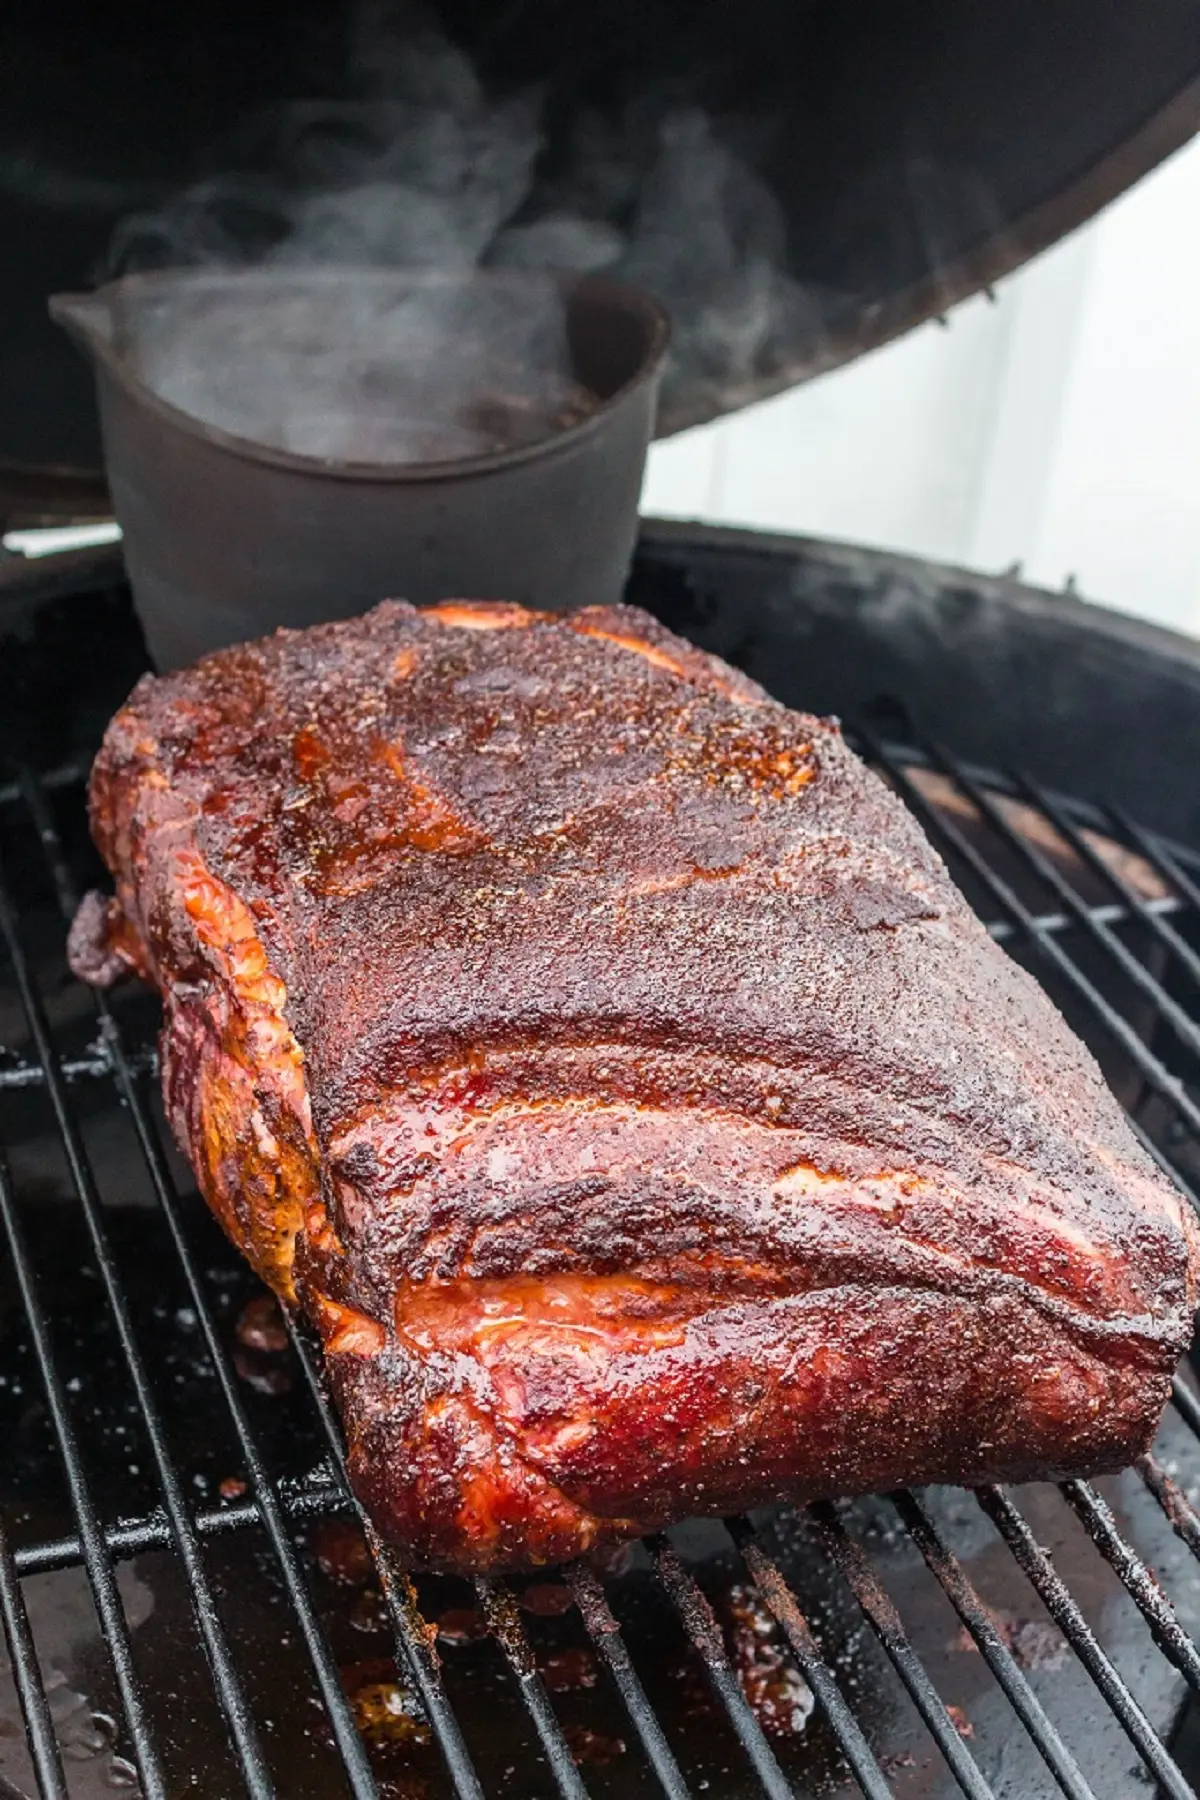 pulled pork smoked bbq - What is the best cut of meat for smoked pulled pork